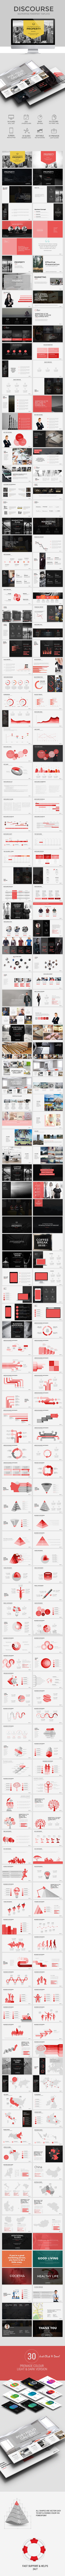 Discourse PowerPoint Template